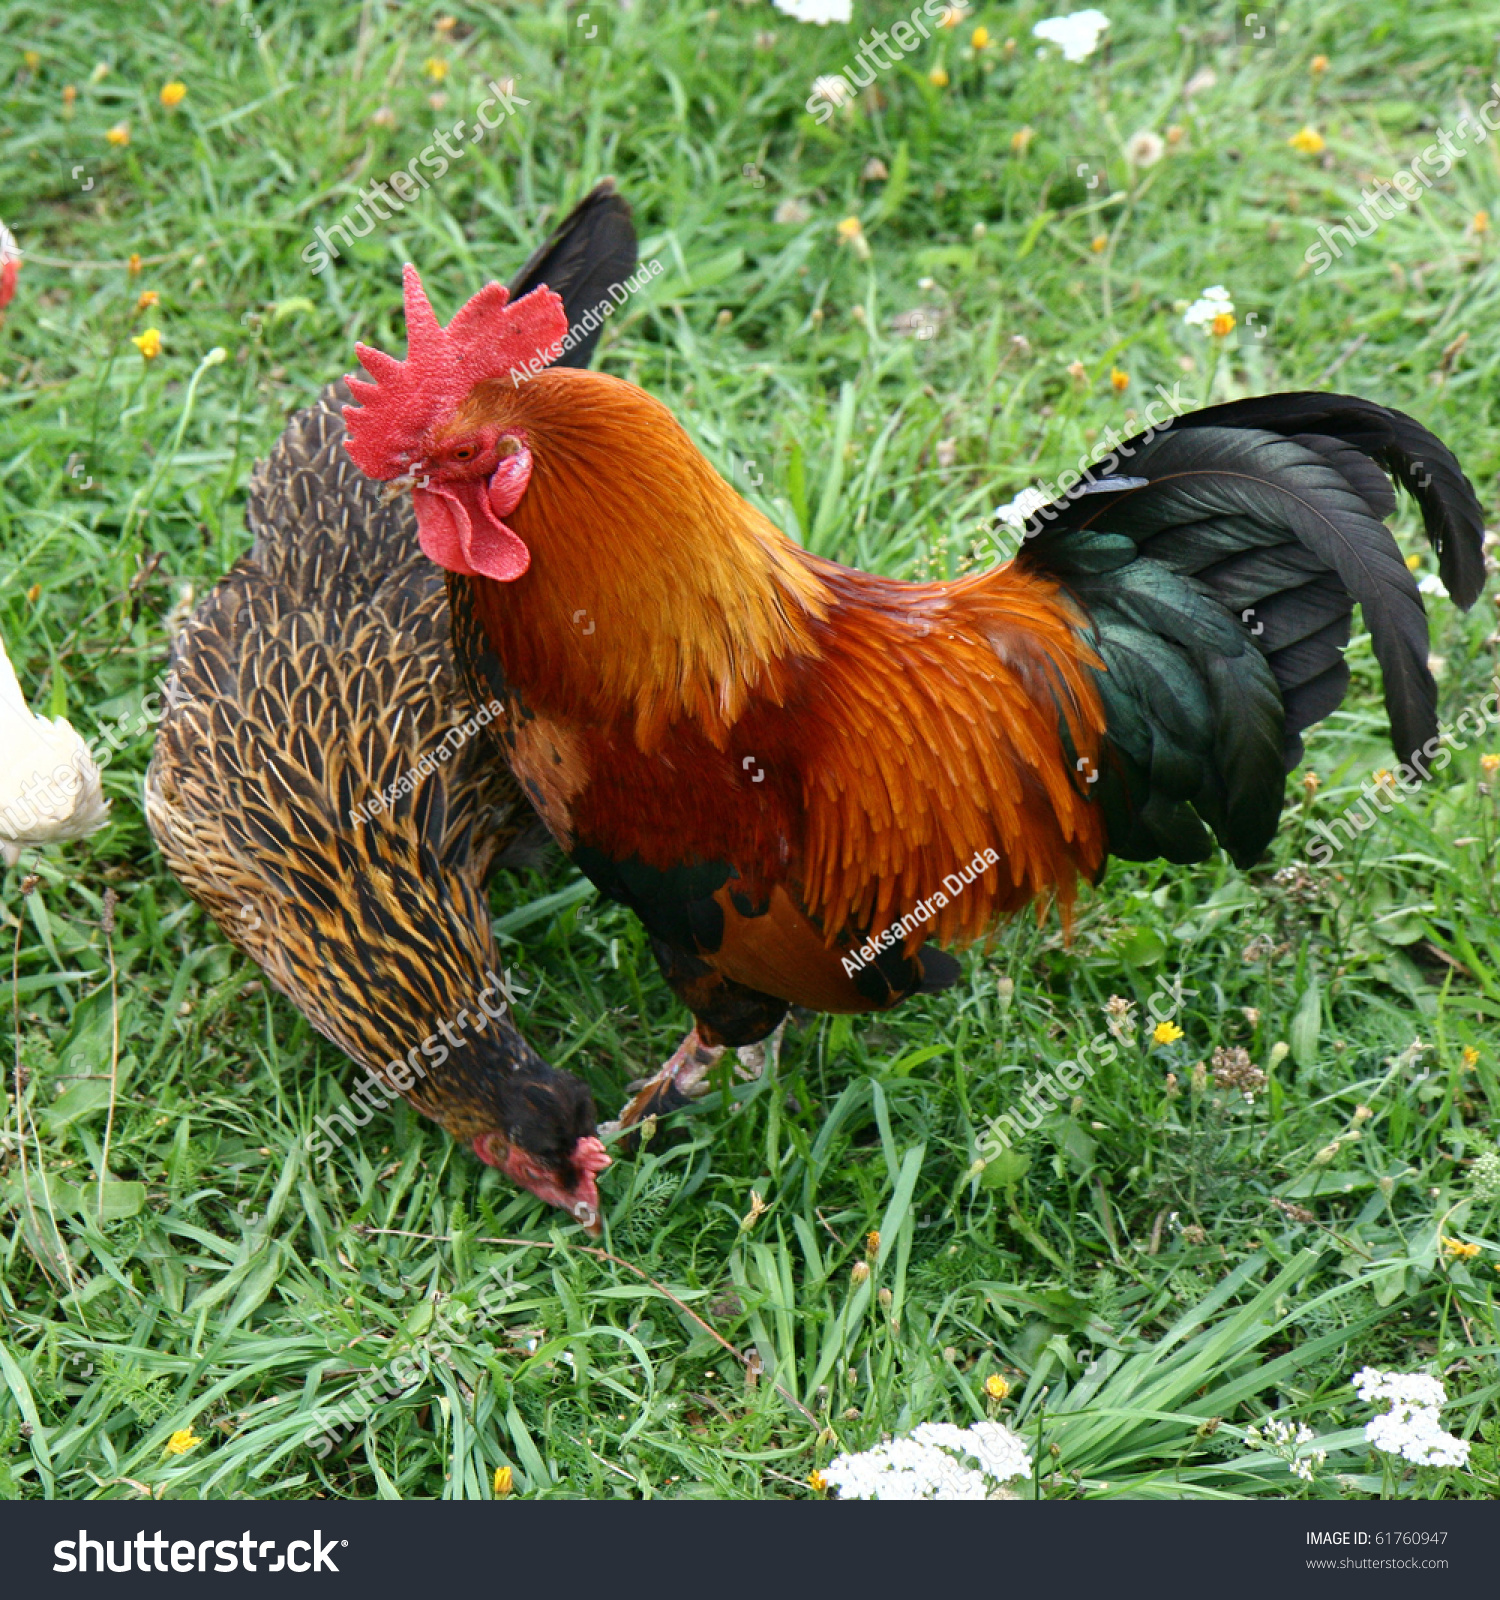 Royalty-free Cock and hen in a yard #61760947 Stock Photo | Avopix.com